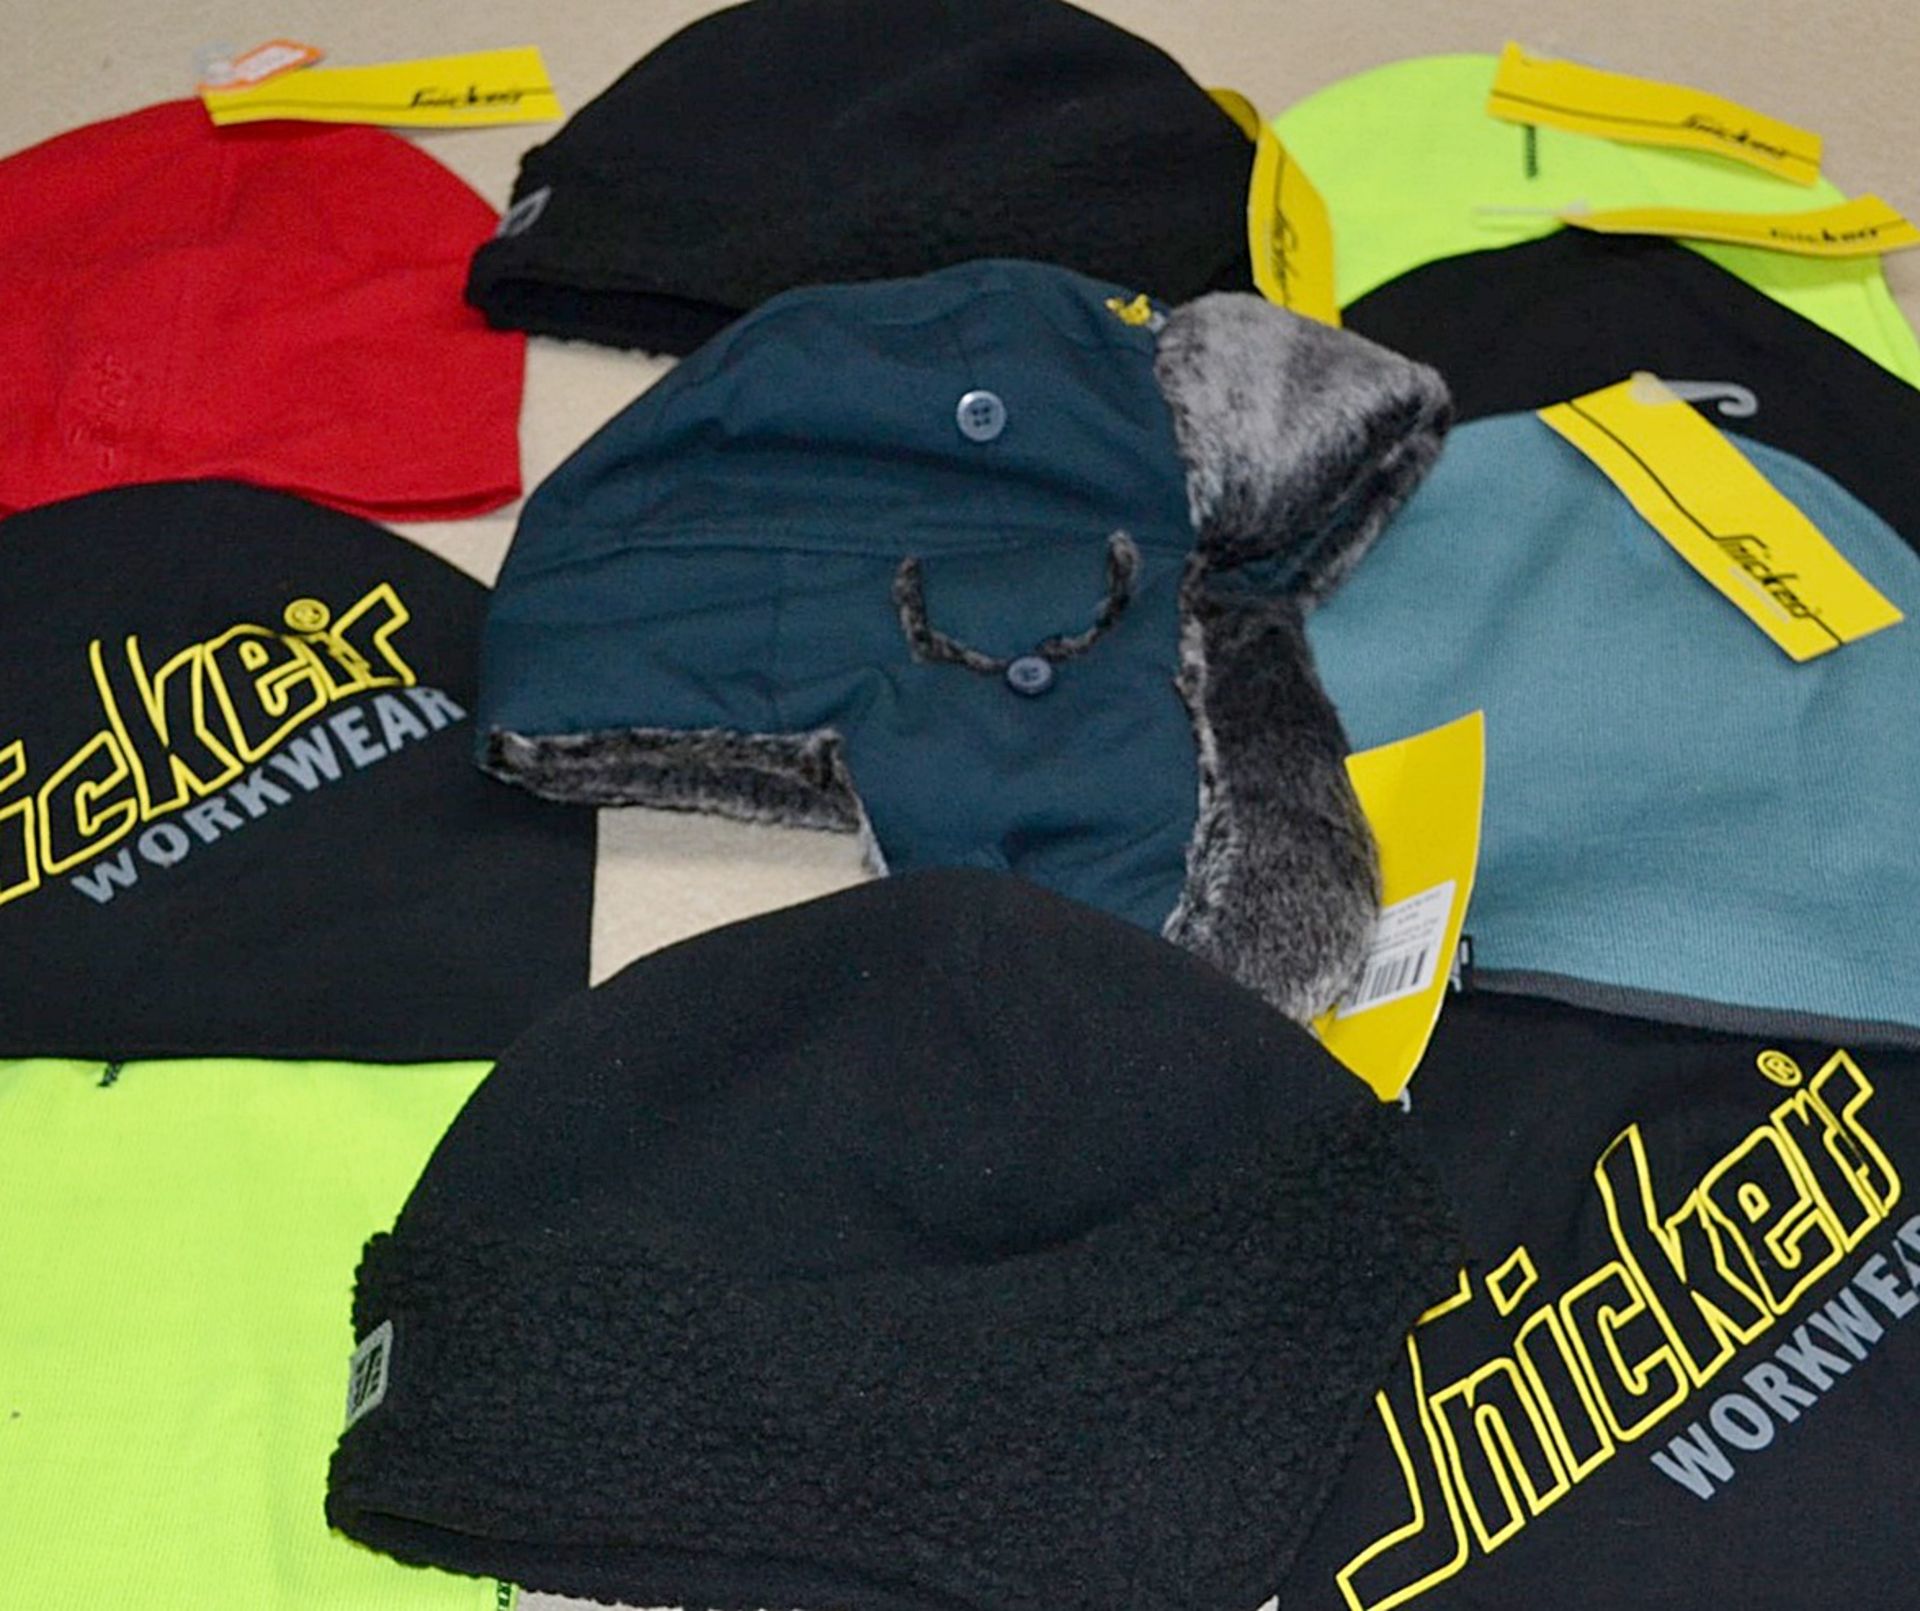 10 x Assorted SNICKERS Hats / Headwear - Includes WINDSTOPPERS & Heater Hats - New/Unused Stock -